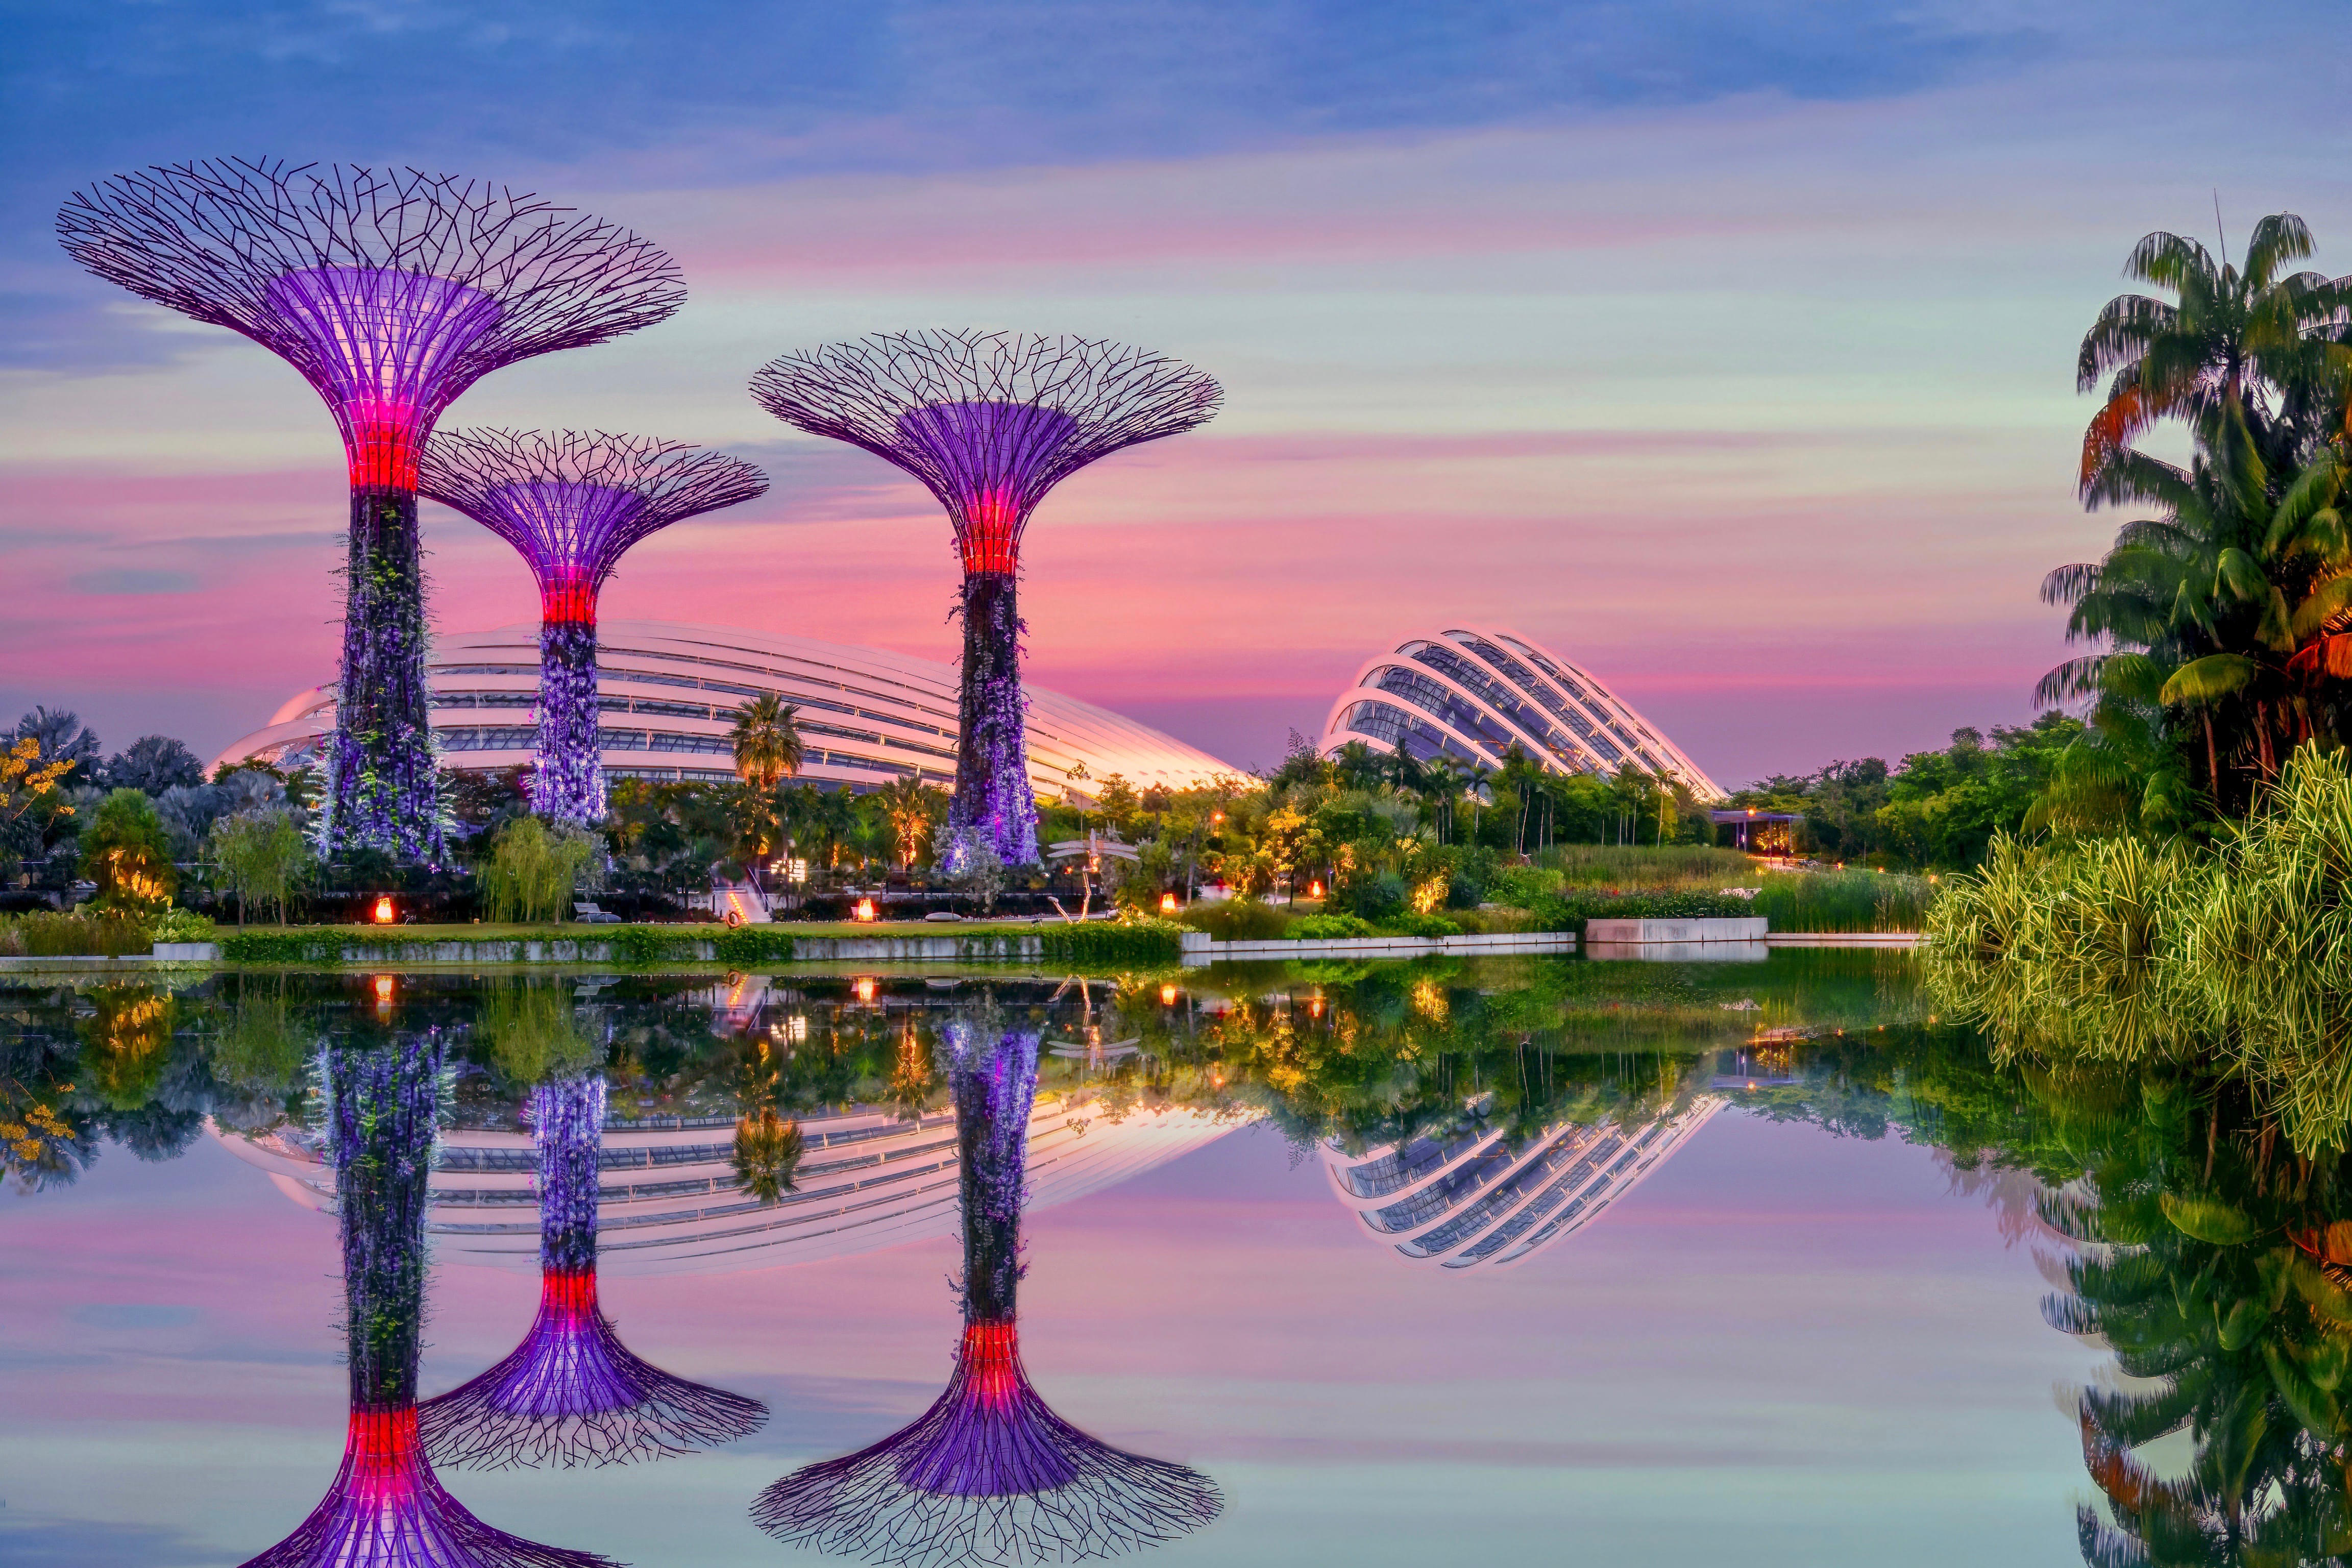 The Supertrees, a true marvel of modern horticulture